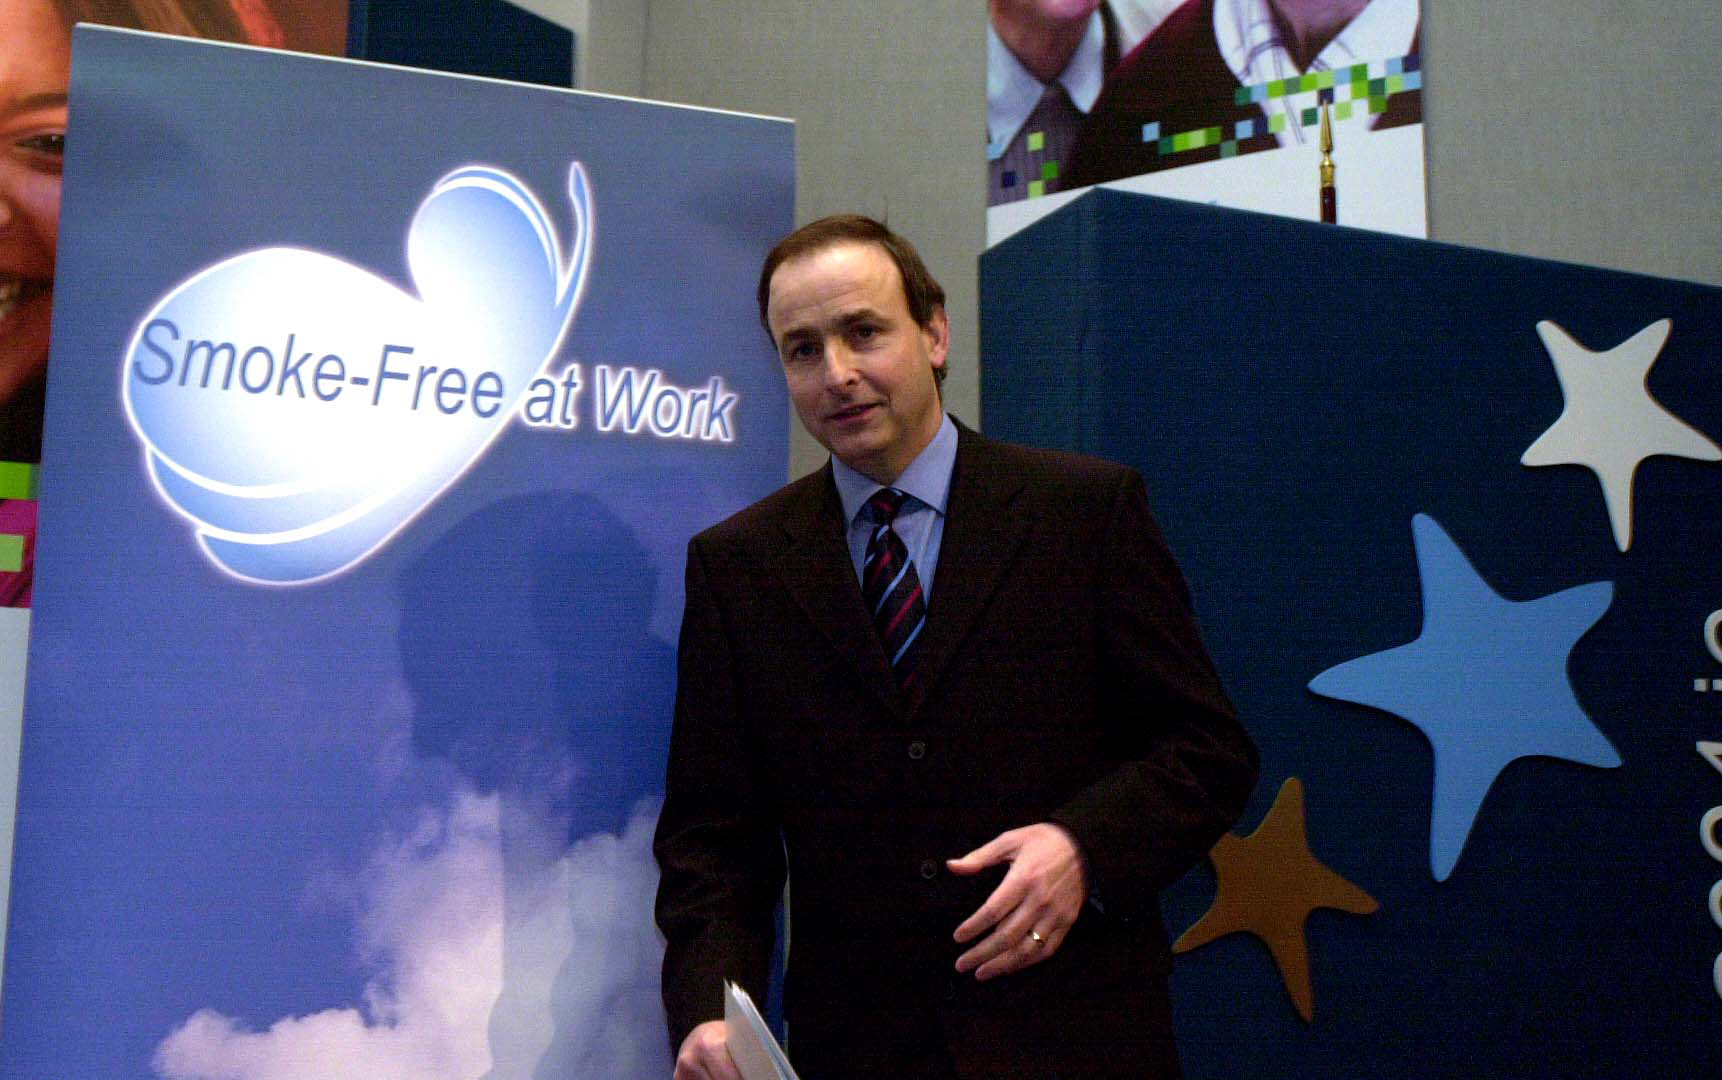 Micheal Martin Fianna Fail Minister for Health at the announcement of the commencement date for the smoke-free workplace regulations 18/2/2004. Image: RollingNews.ie